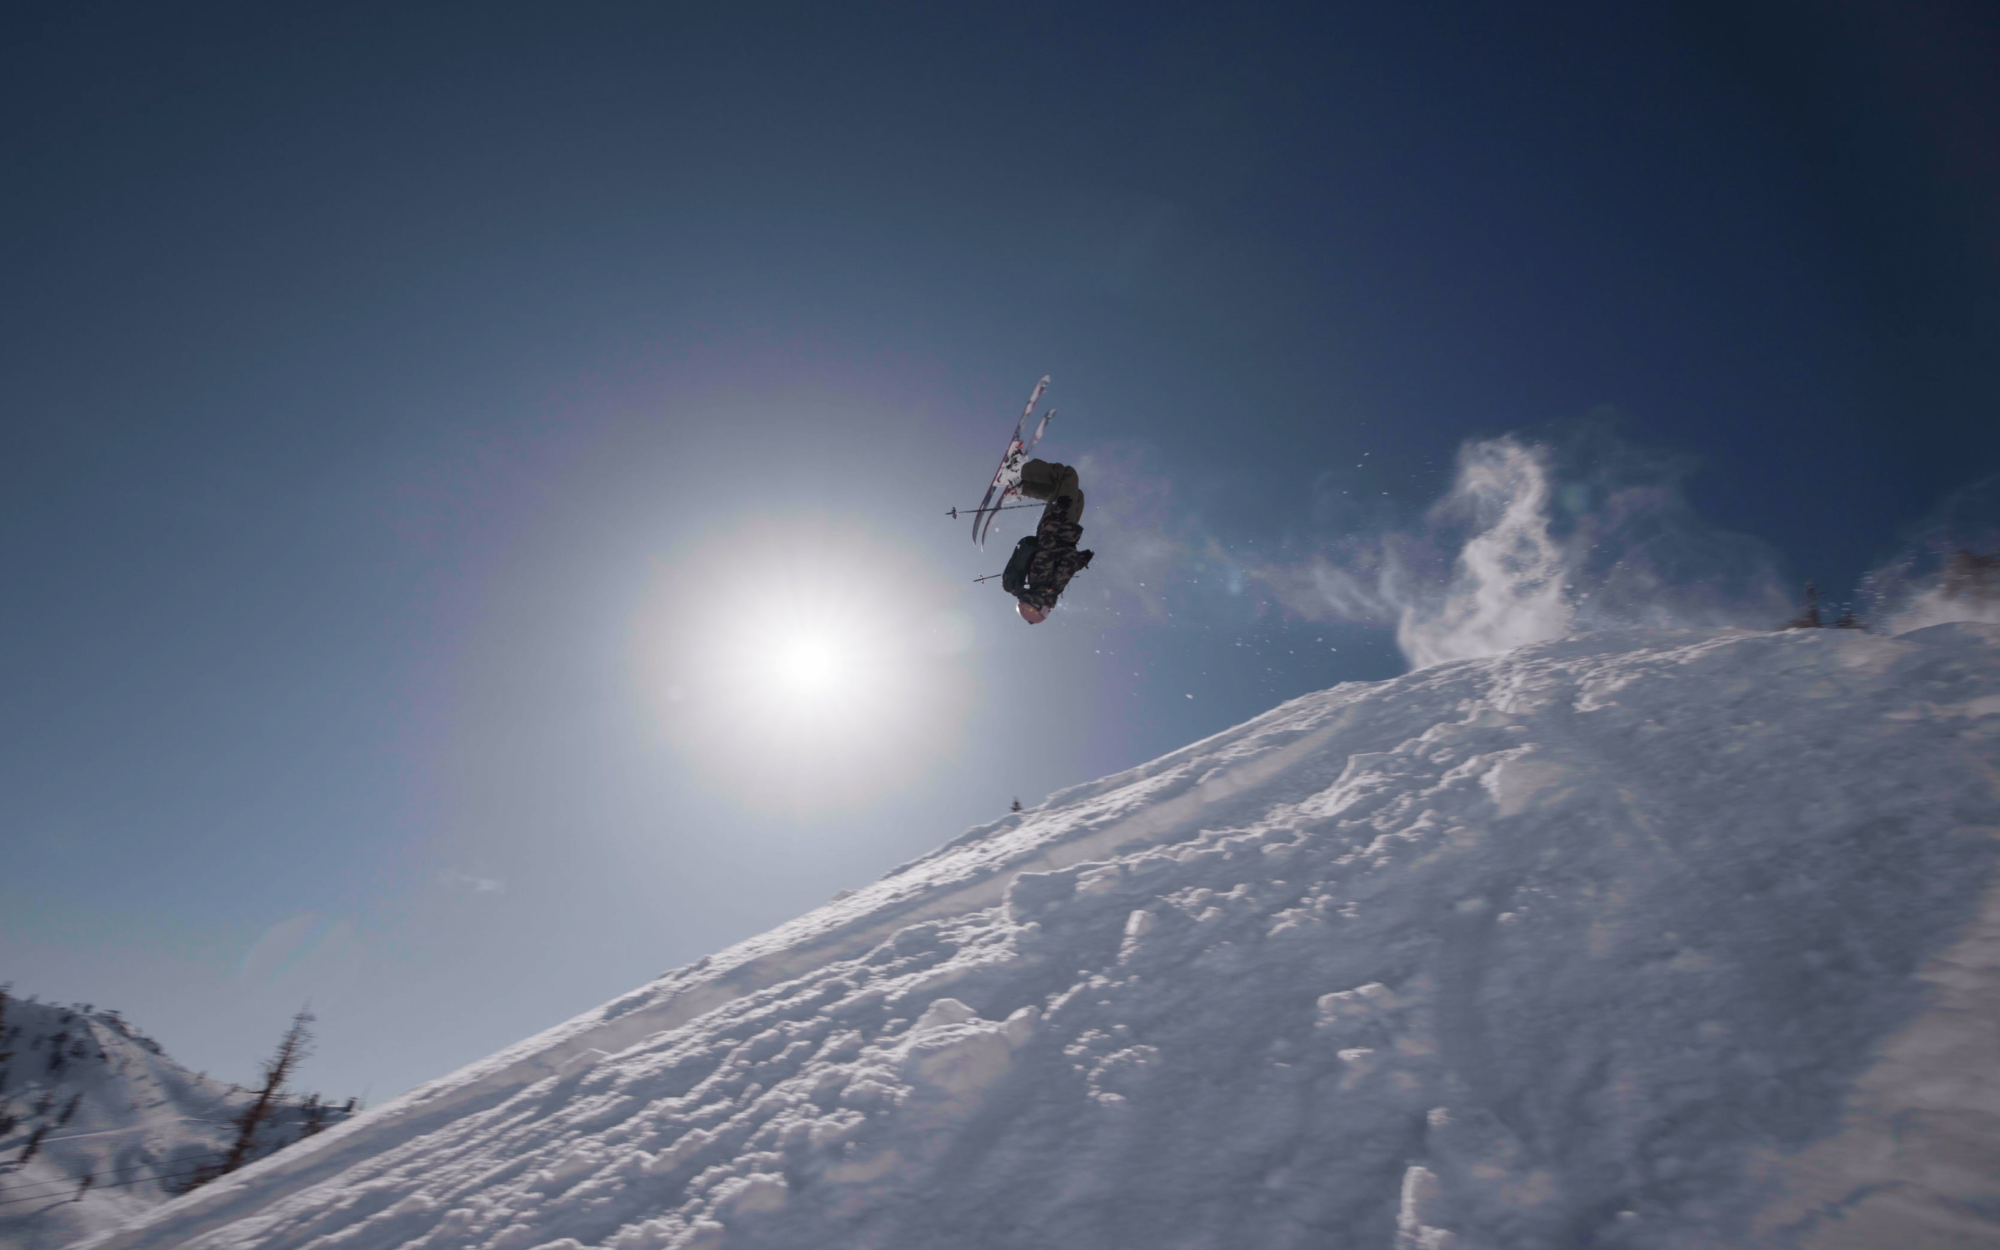 MHW athlete Lily Bradley finds  the bright spot and spots a landing.